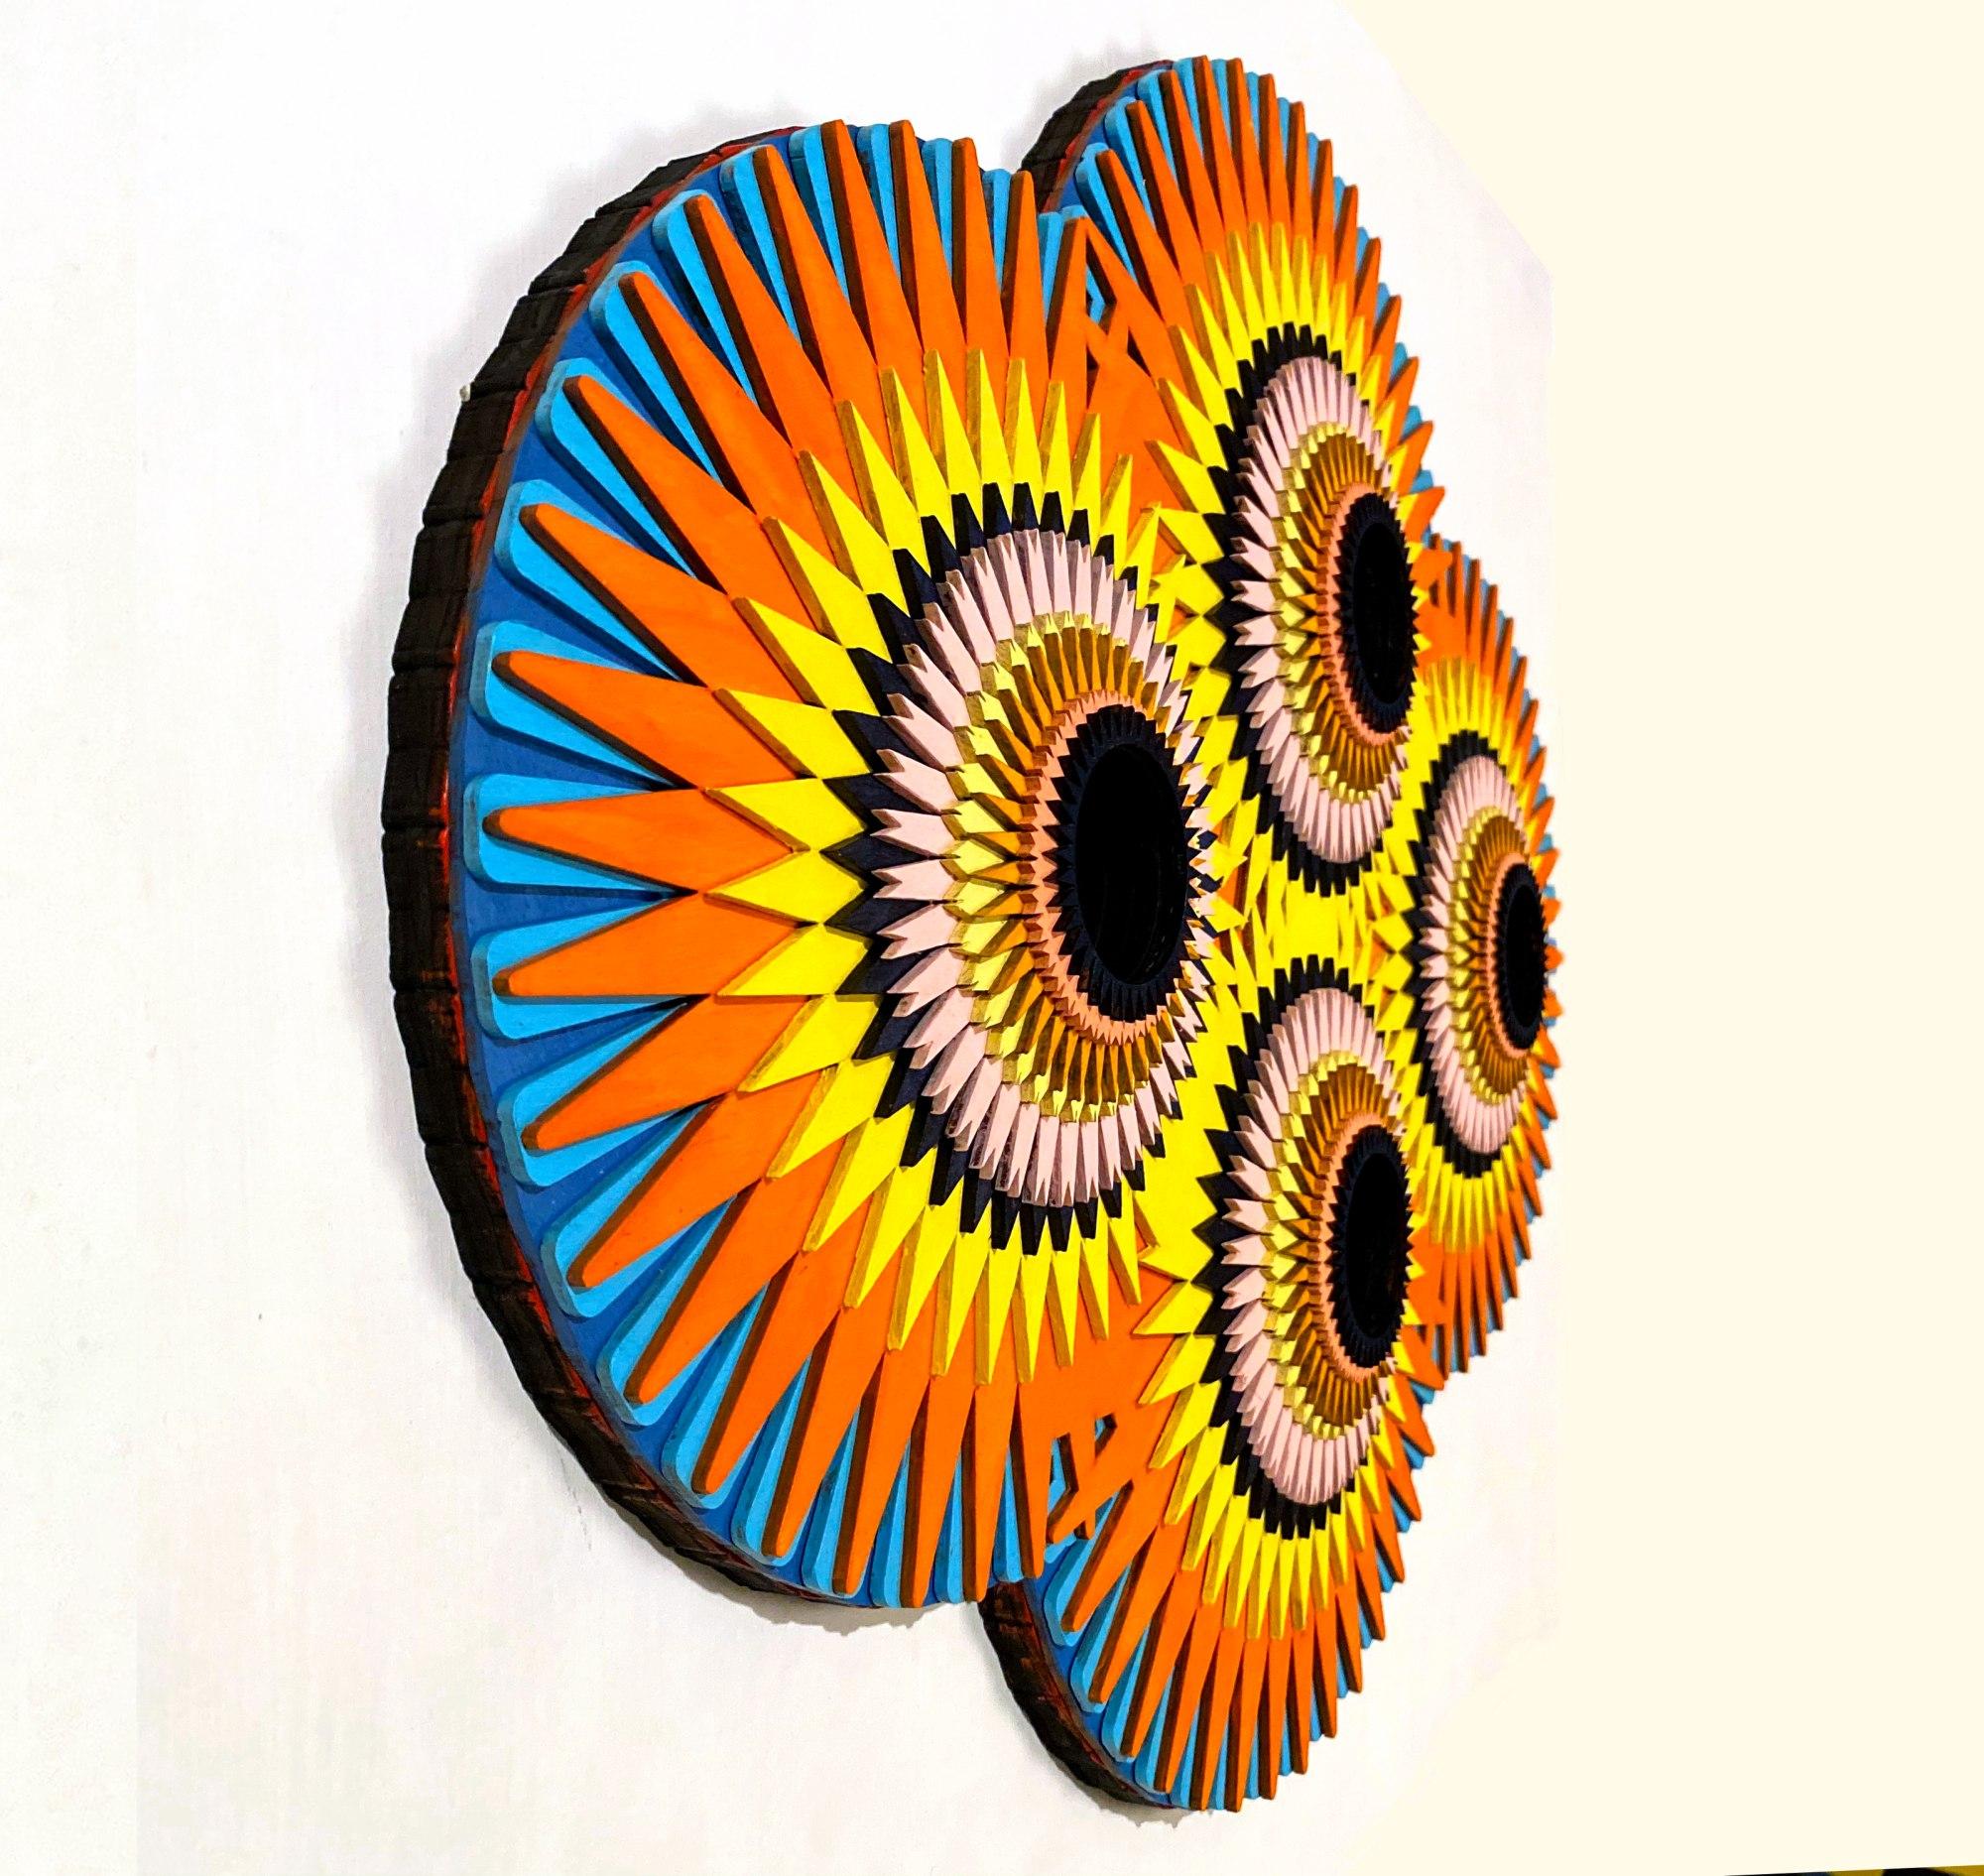 It's Complicated x4, Acrylic on Wood, Wall sculpture by Christine Romanell 1